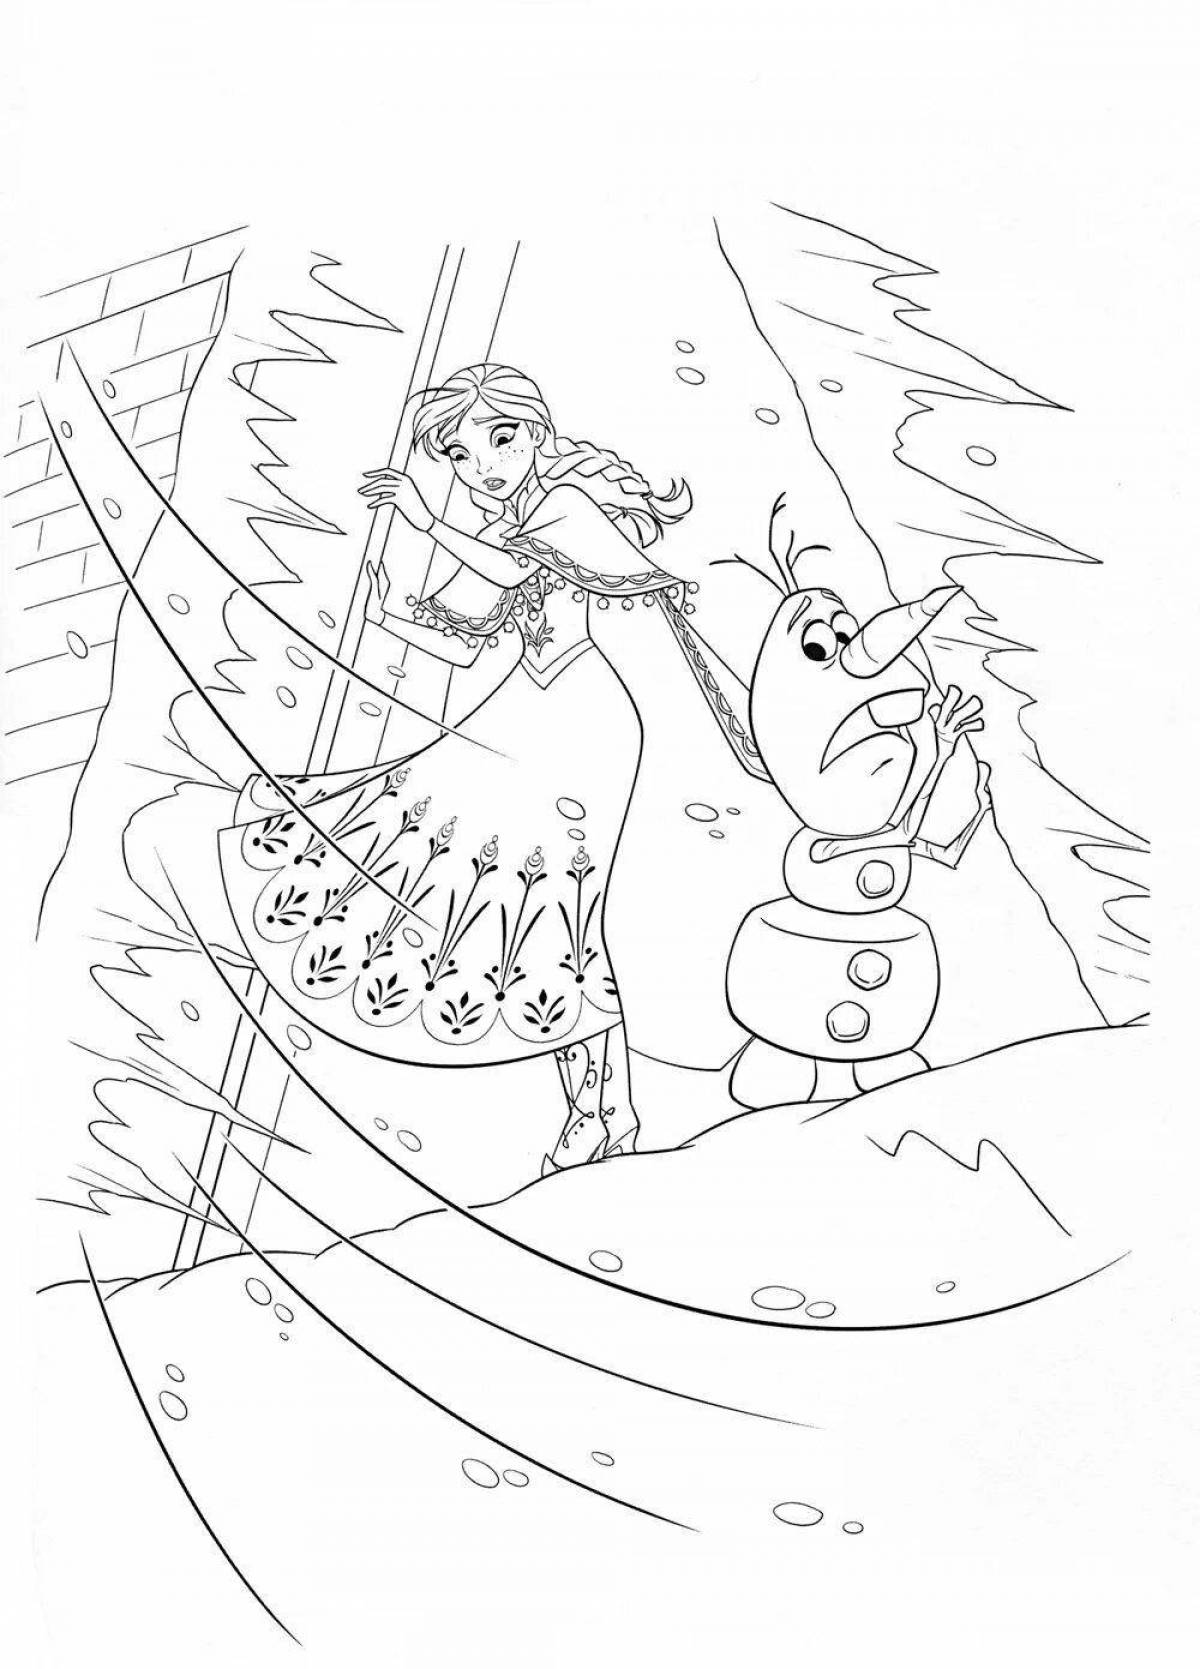 Anna and Olaf funny coloring book